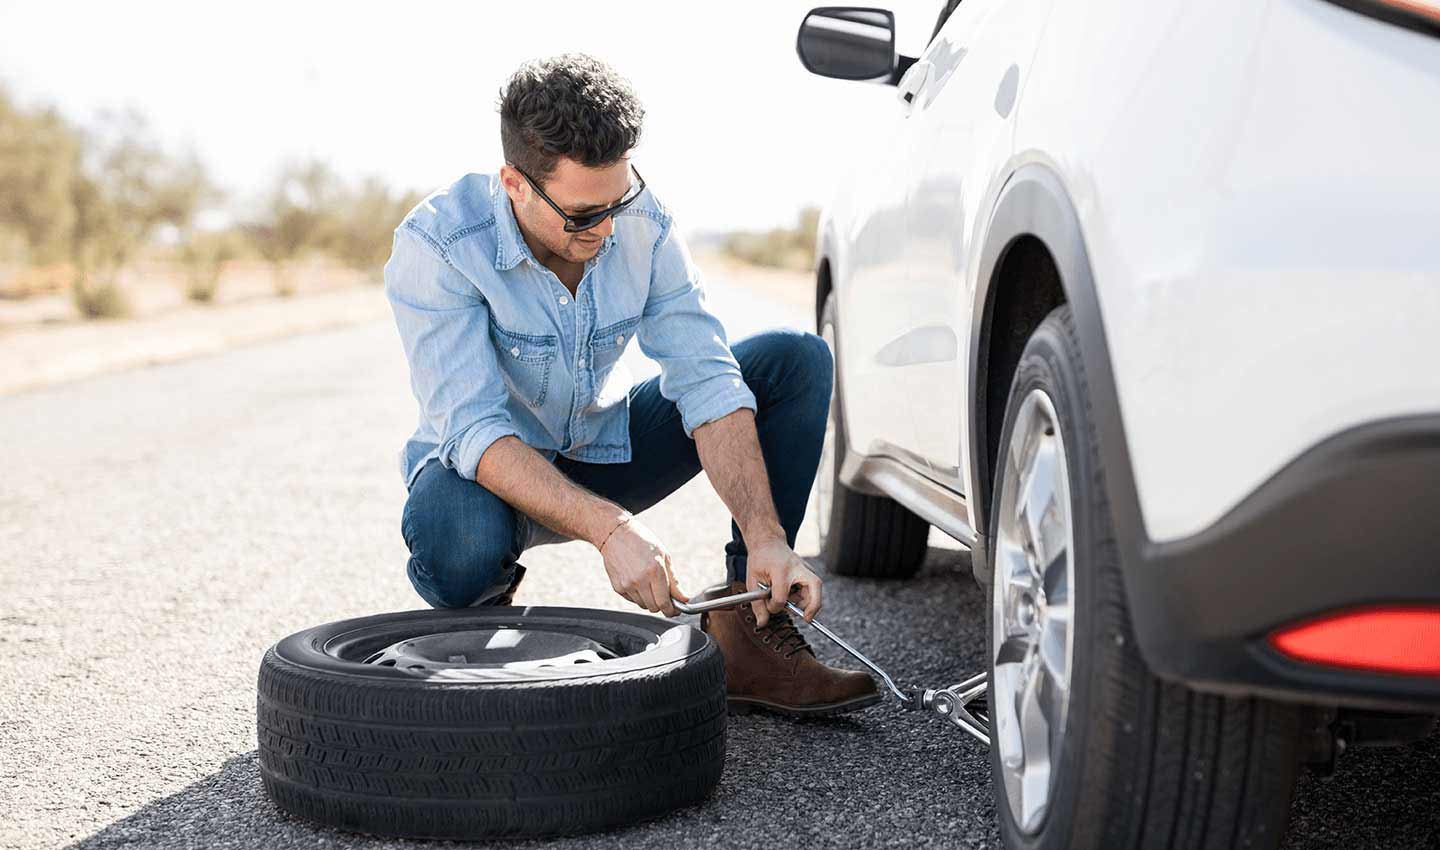 HOW TO CHANGE A FLAT TYRE